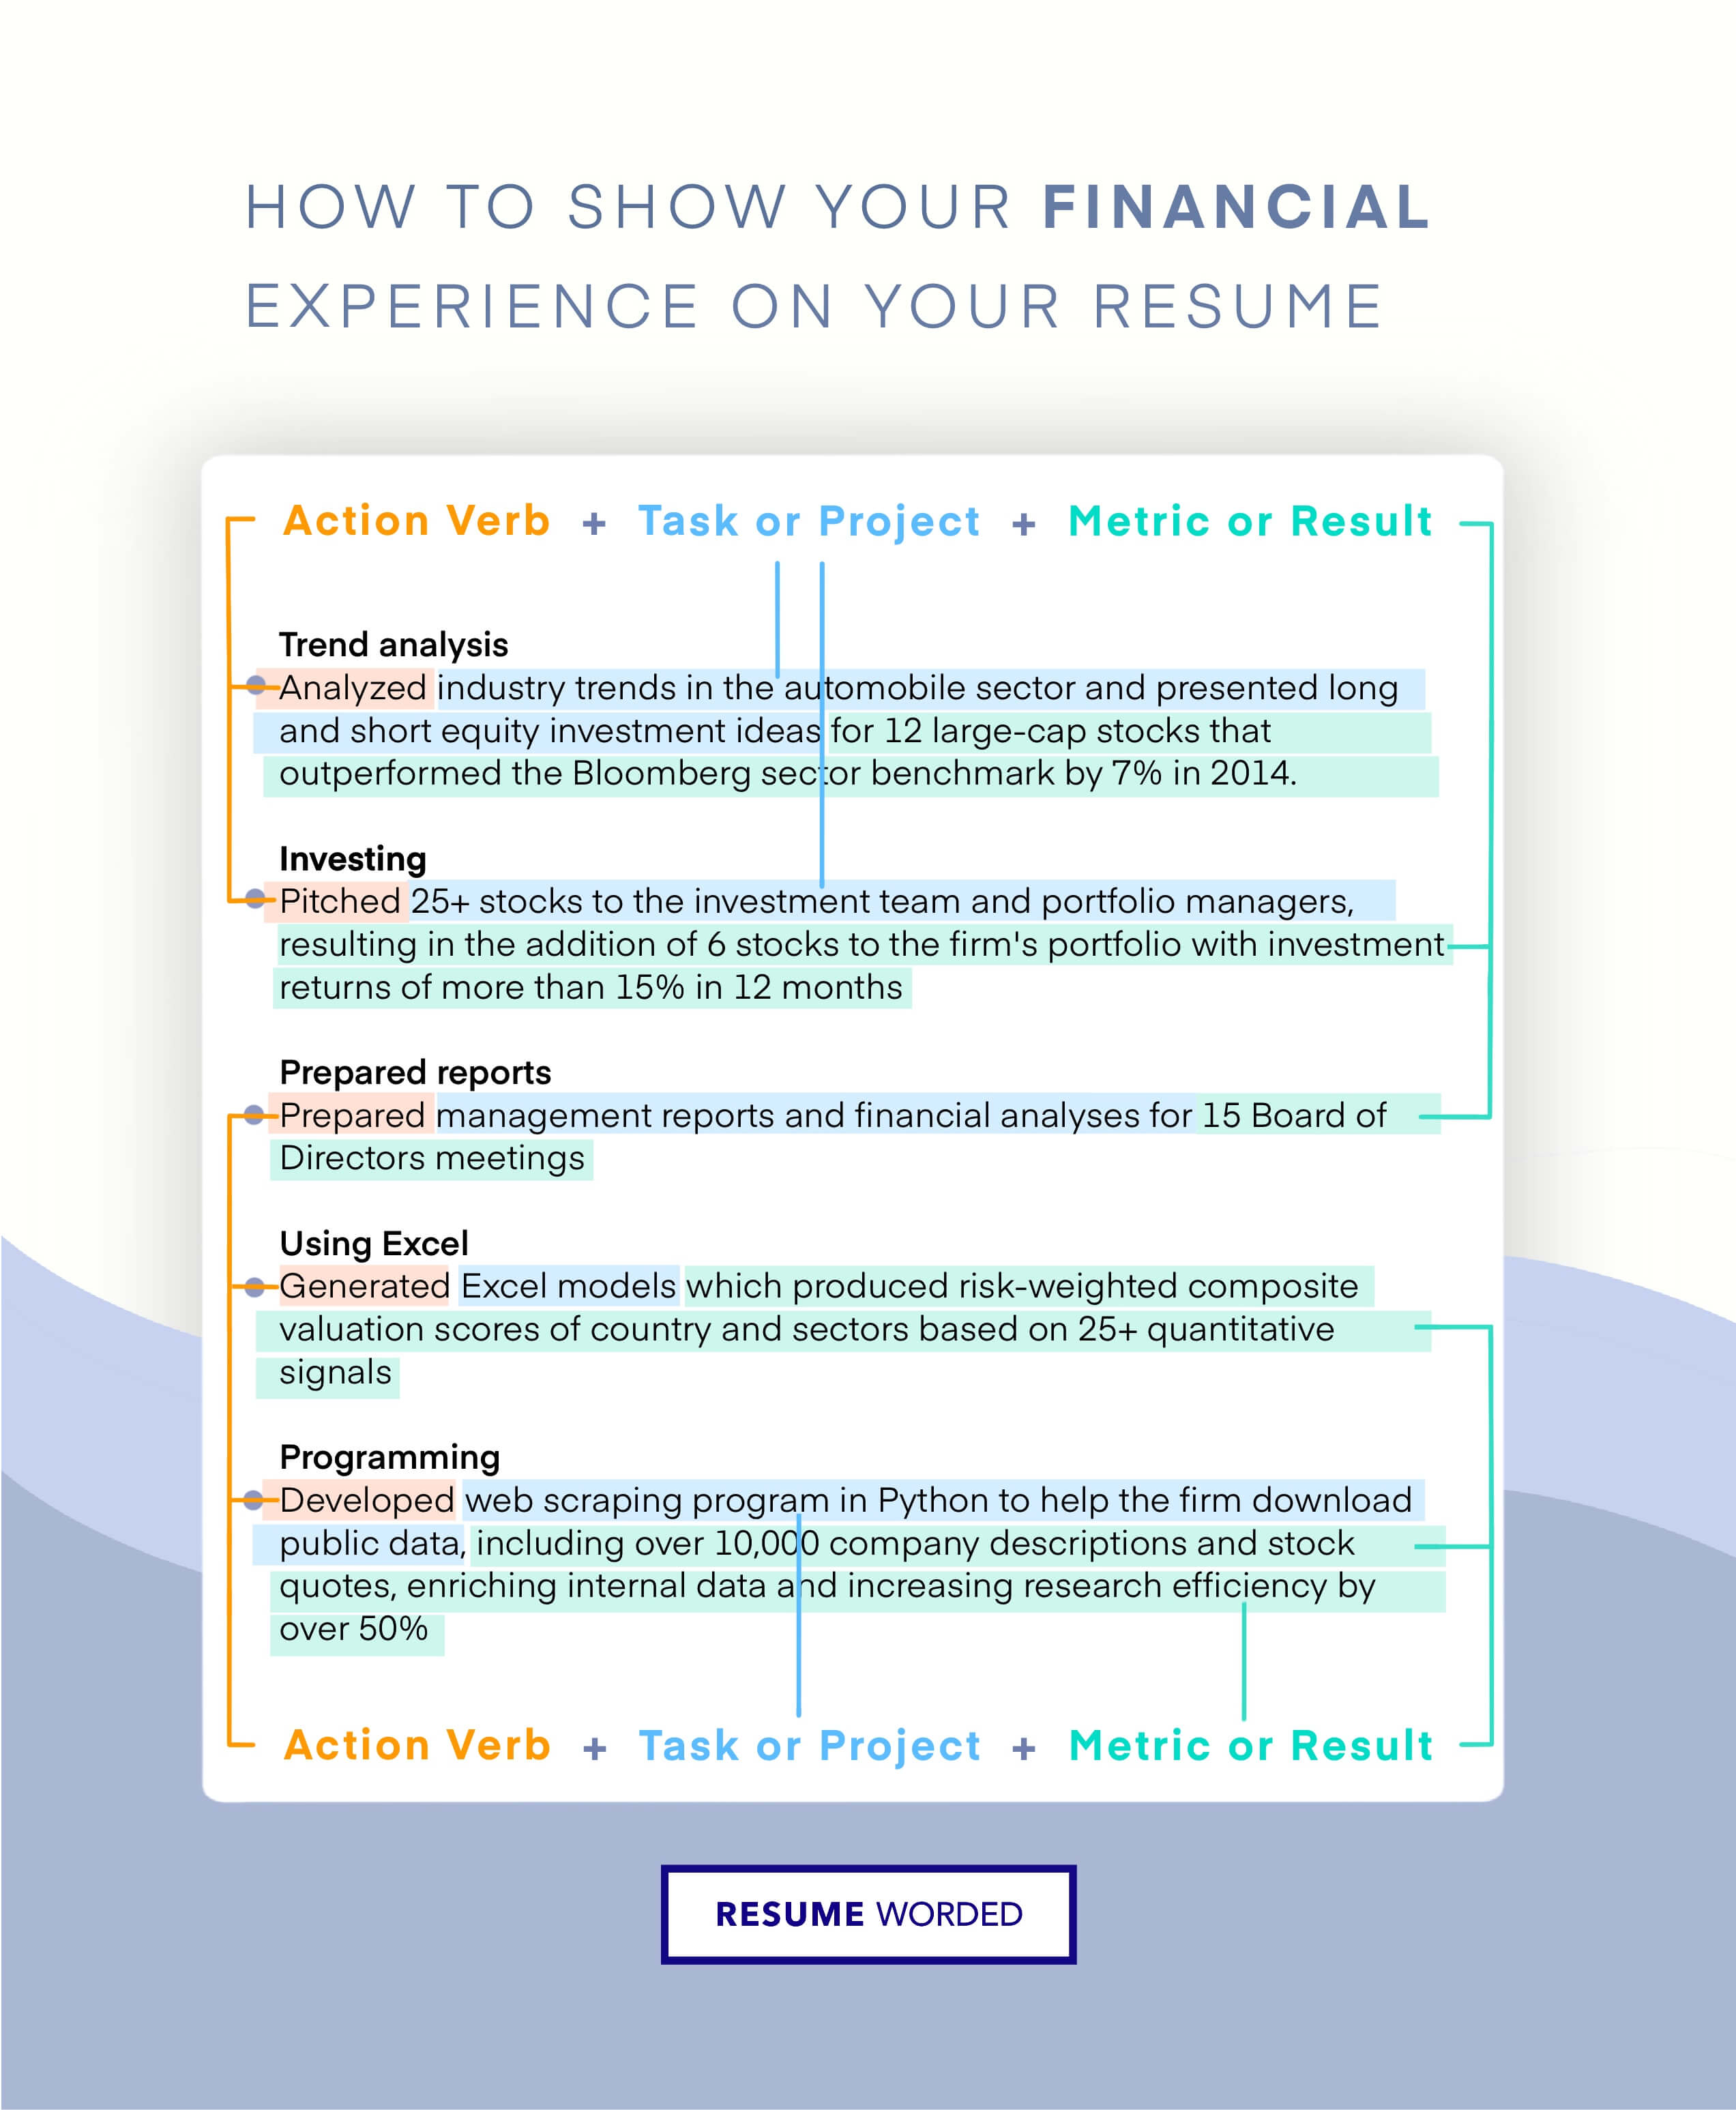 Use strong action verbs, focused on finance and leadership - Chief Financial Officer (CFO) - 2 Resume